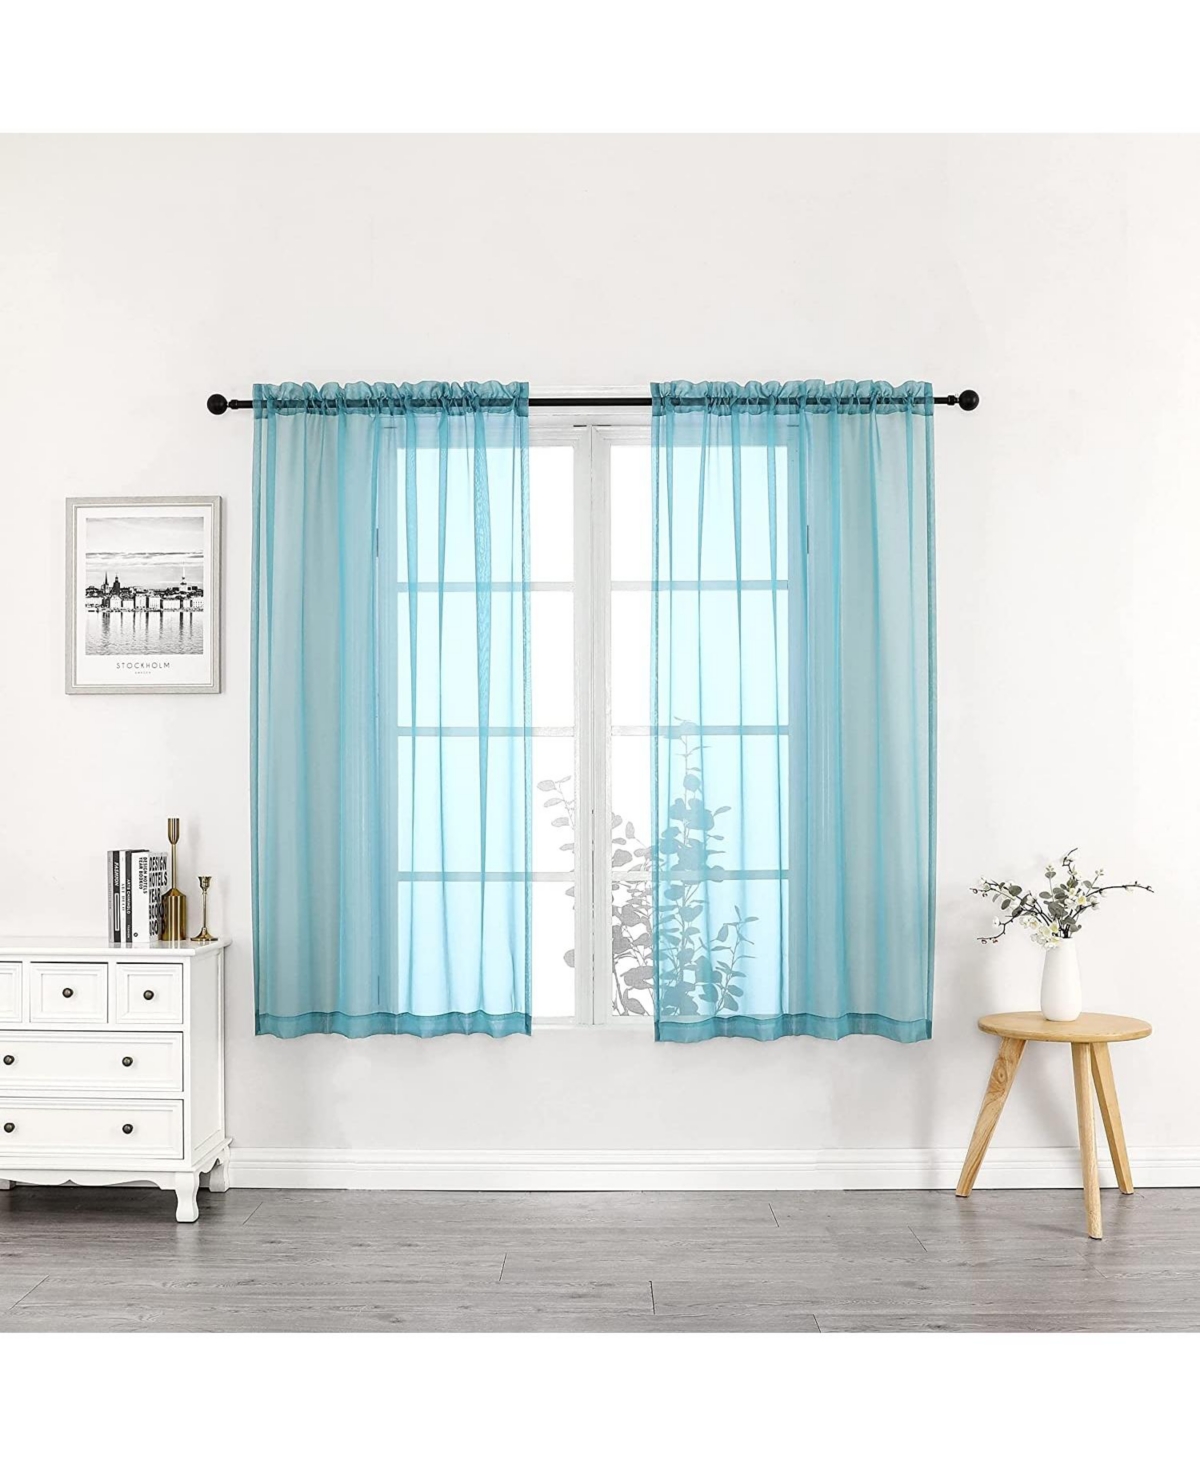 Basics Turquoise Blue 2 Piece Rod Pocket Translucent Sheer Voile Window Curtain Panels For Small Windows - 45 In. Long - Blue